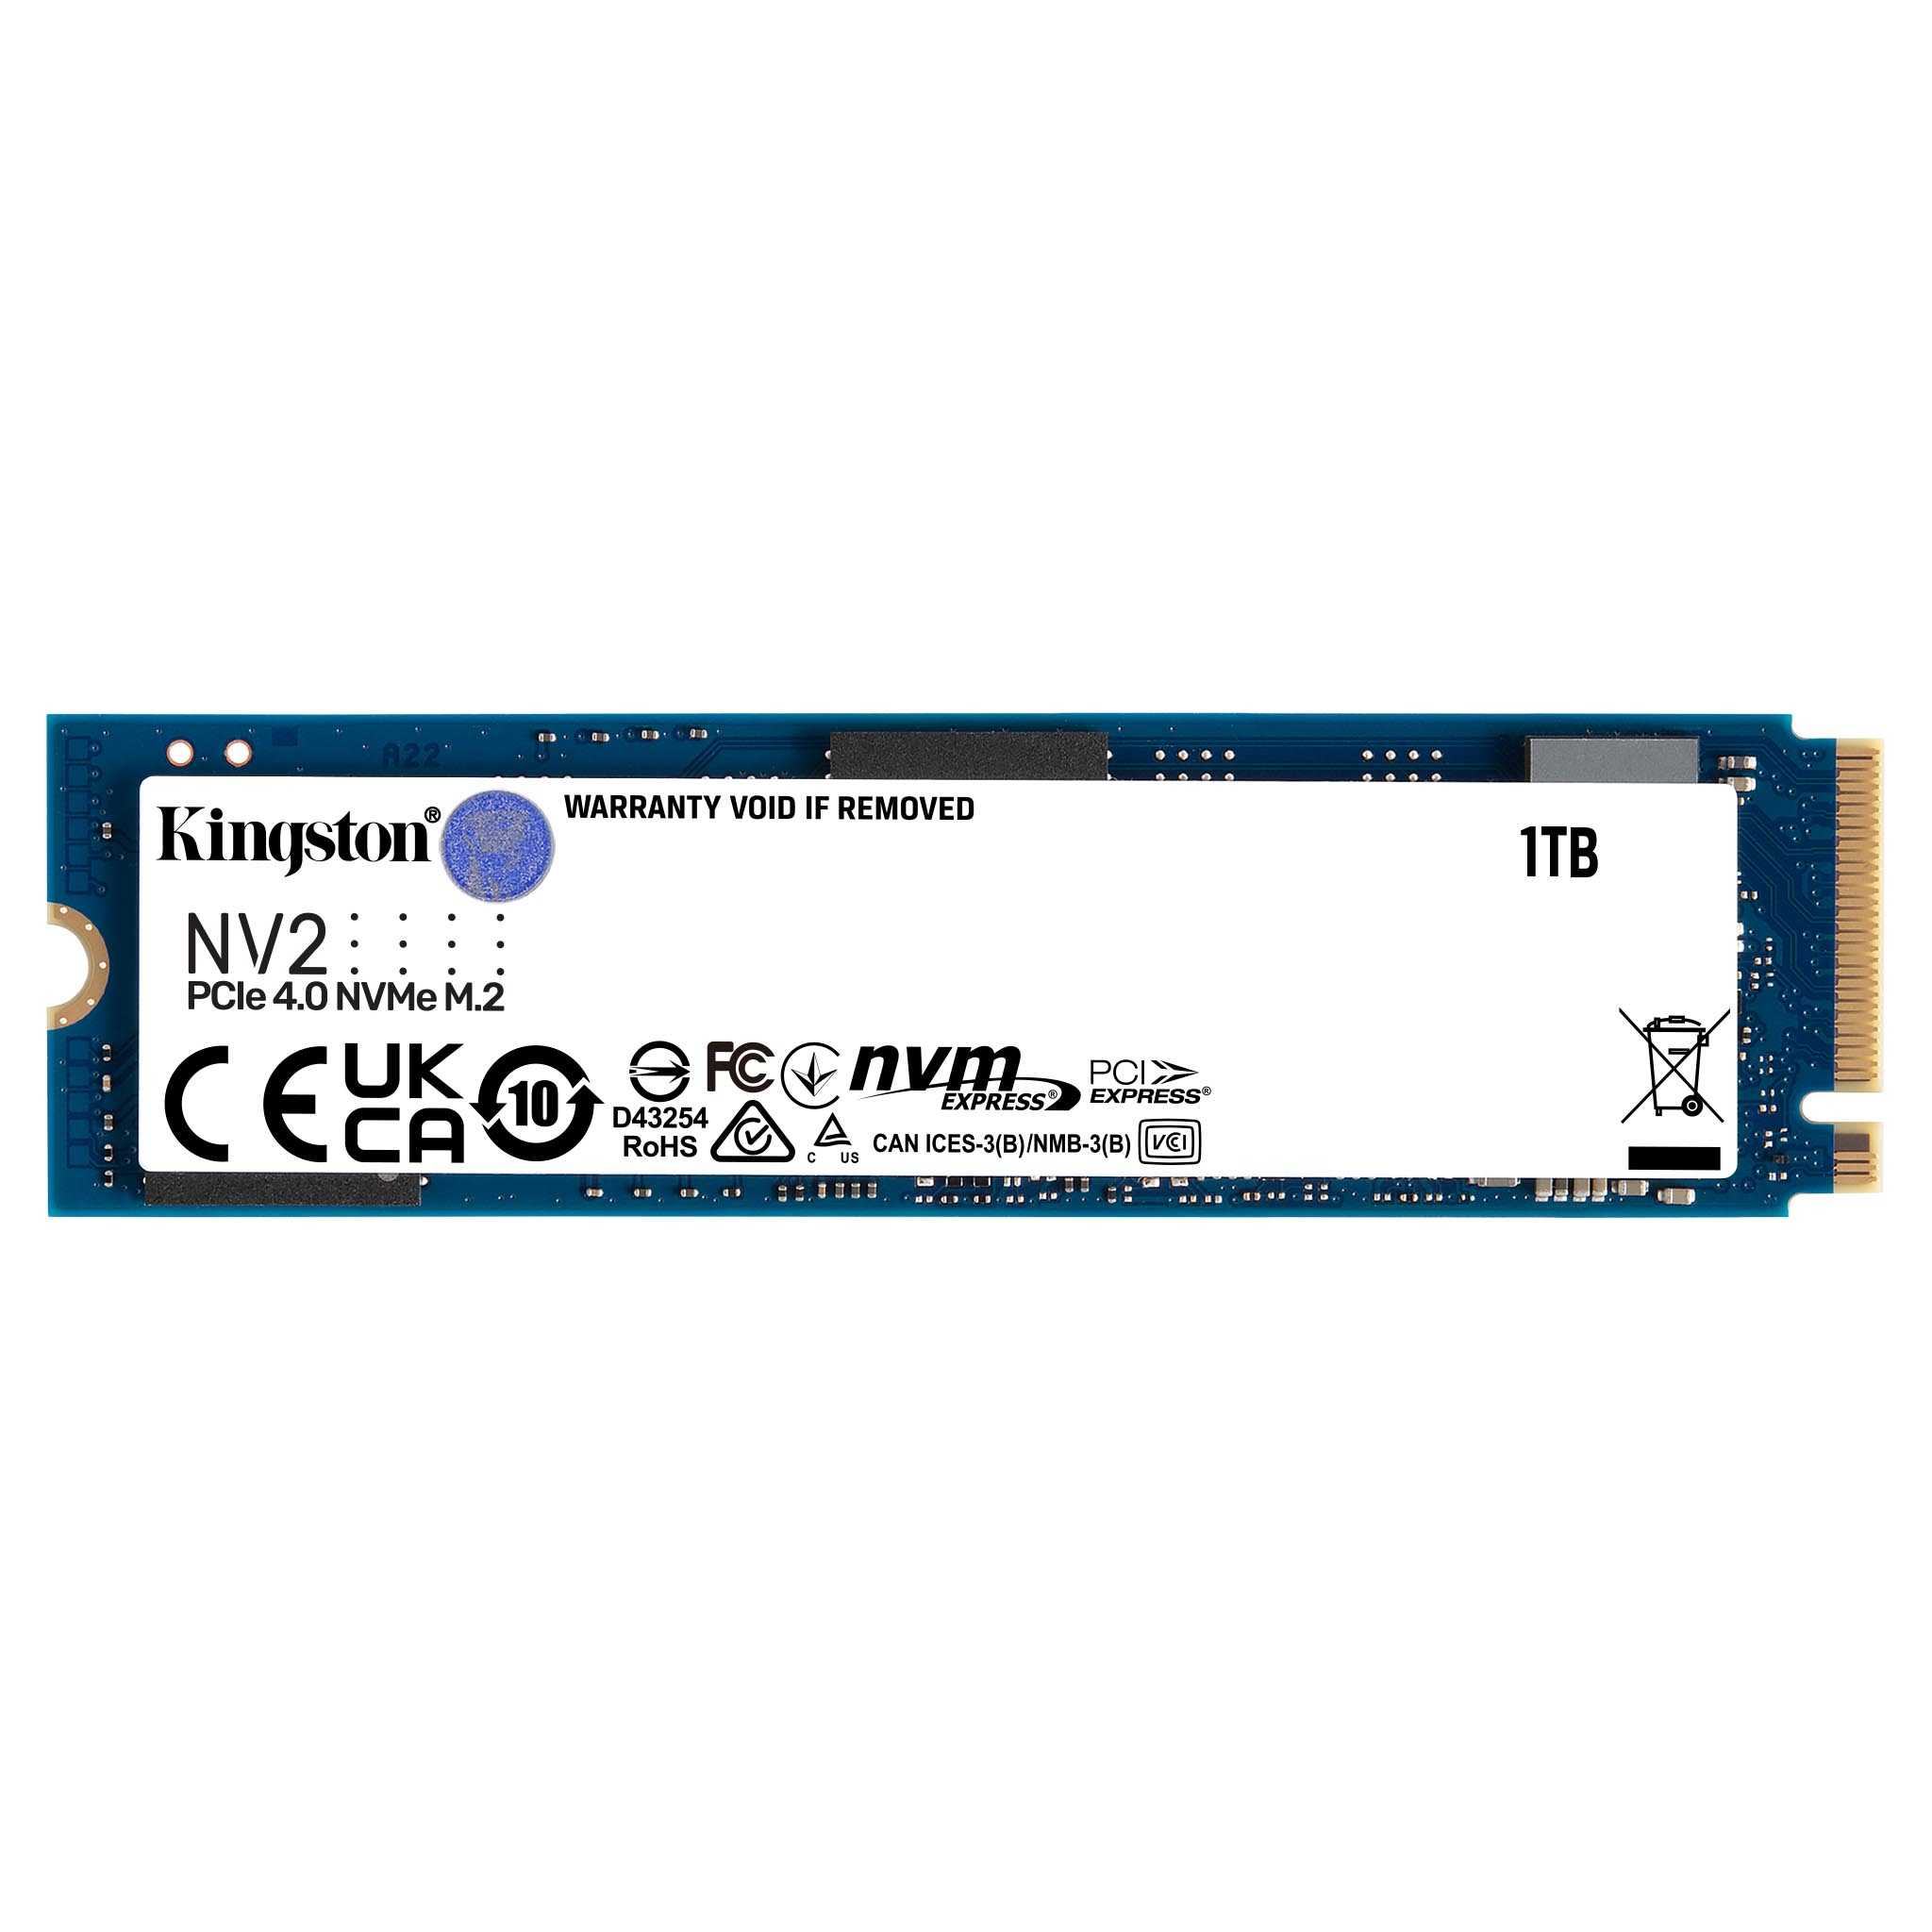 Example Dismantle Goods NV2 PCIe 4.0 NVMe SSD 250GB – 2TB - Kingston Technology